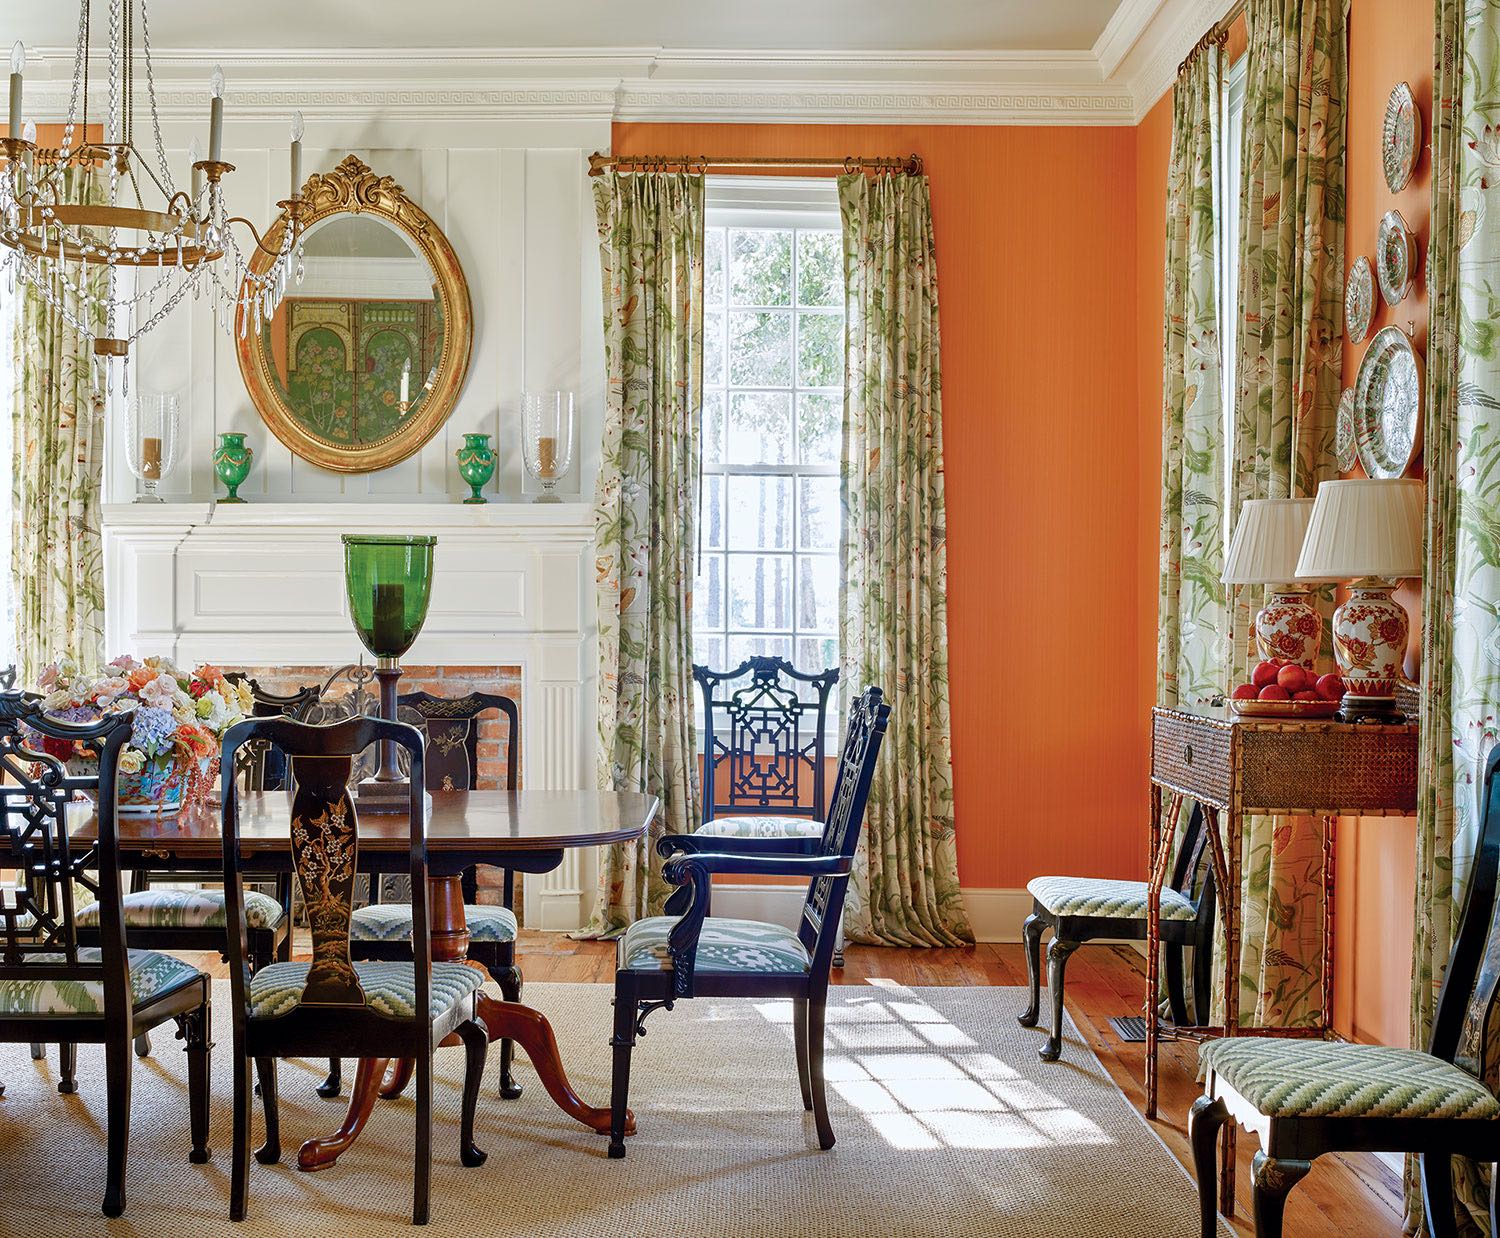 Dining room designed by James Farmer at McCurdy Plantation, featuring apricot walls, botanical-patterned curtains, a white-painted fireplace mantel and crown molding and a neutral area rug.